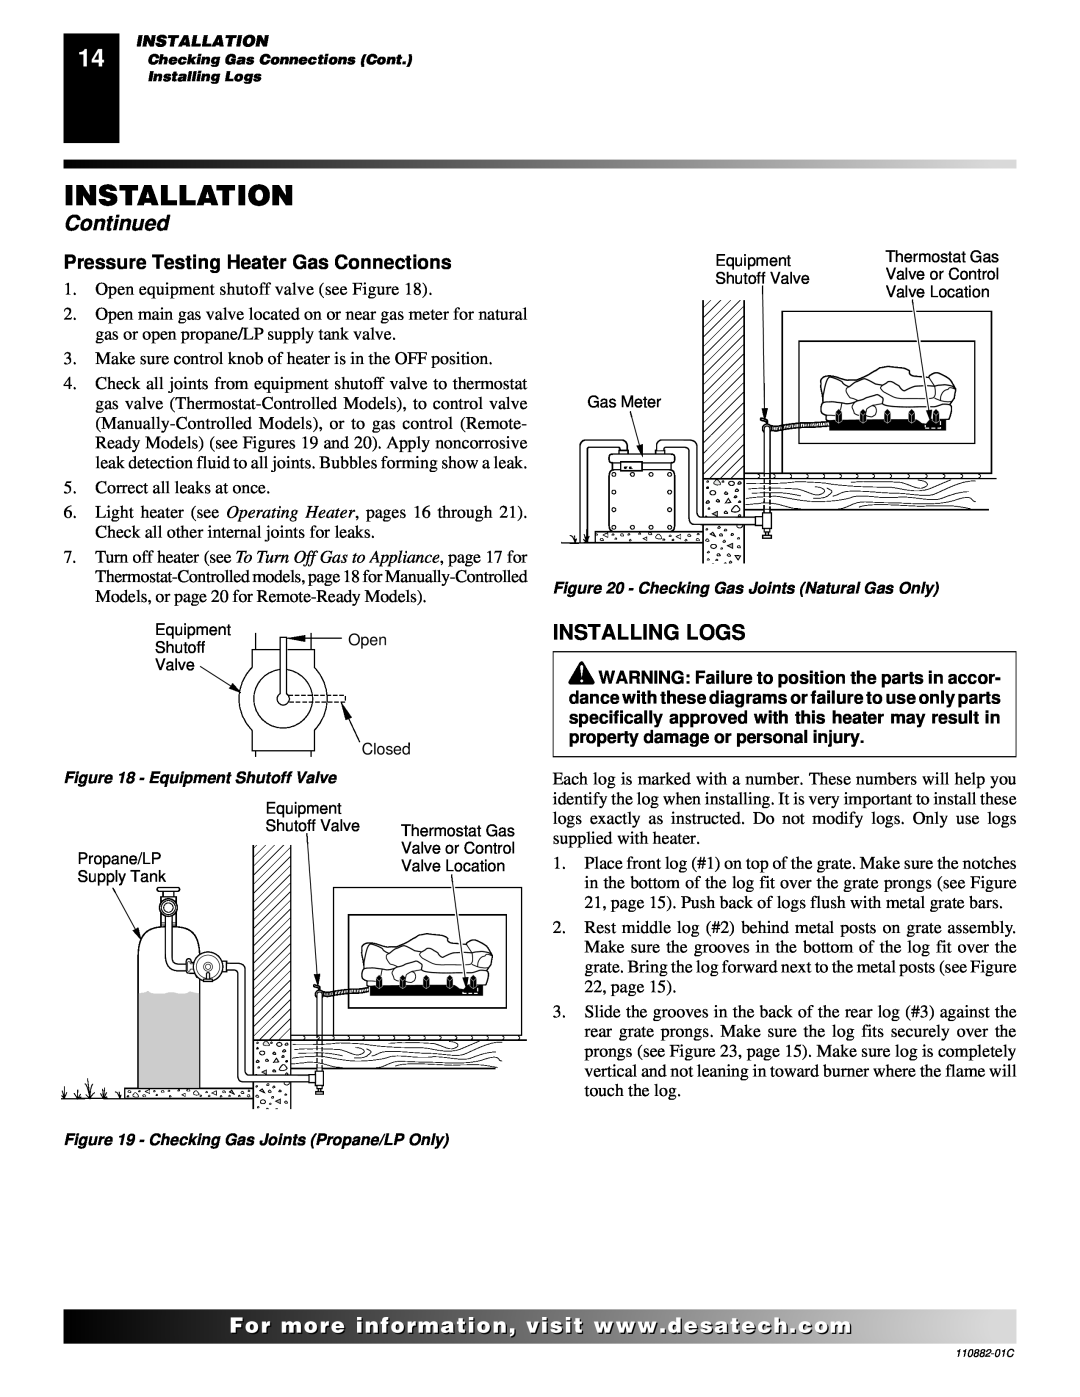 Desa 30, R, V, T installation manual Installation, Continued, Installing Logs, Pressure Testing Heater Gas Connections 